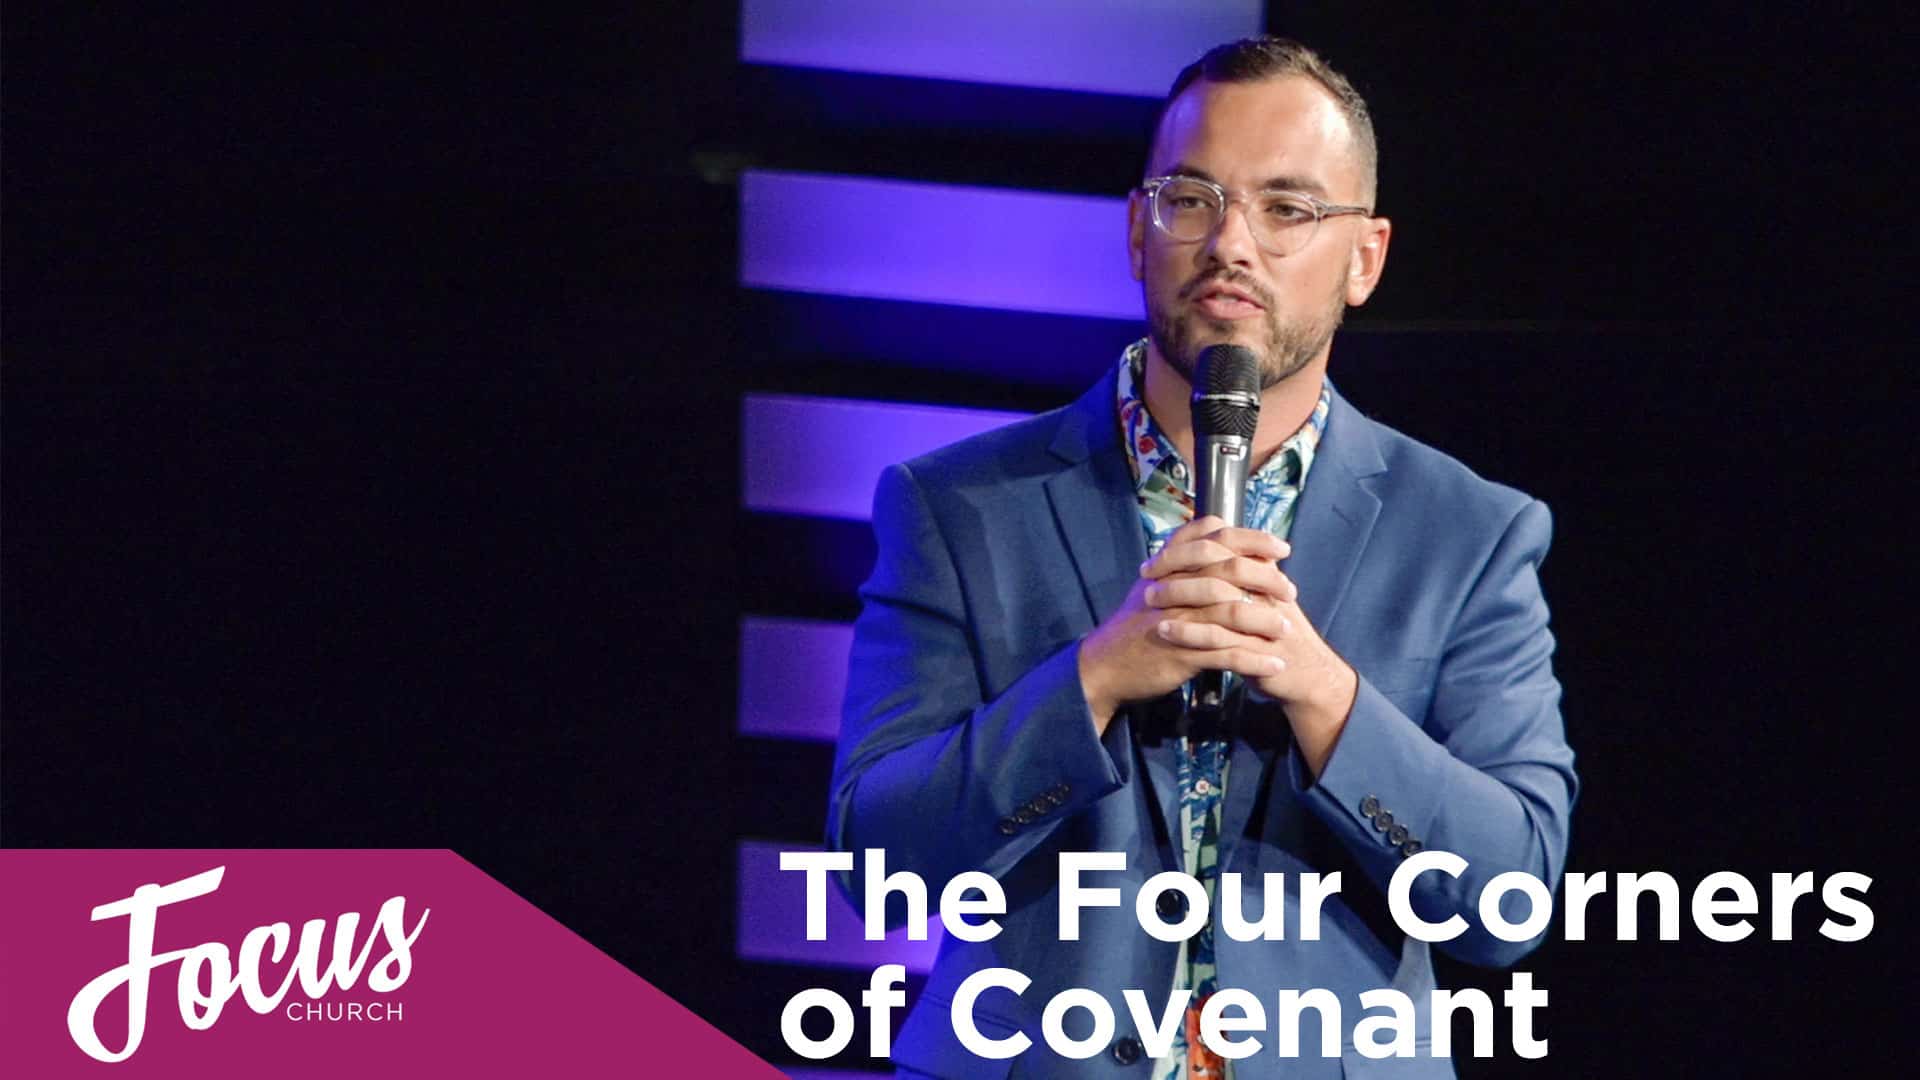 The Four Corners of Covenant